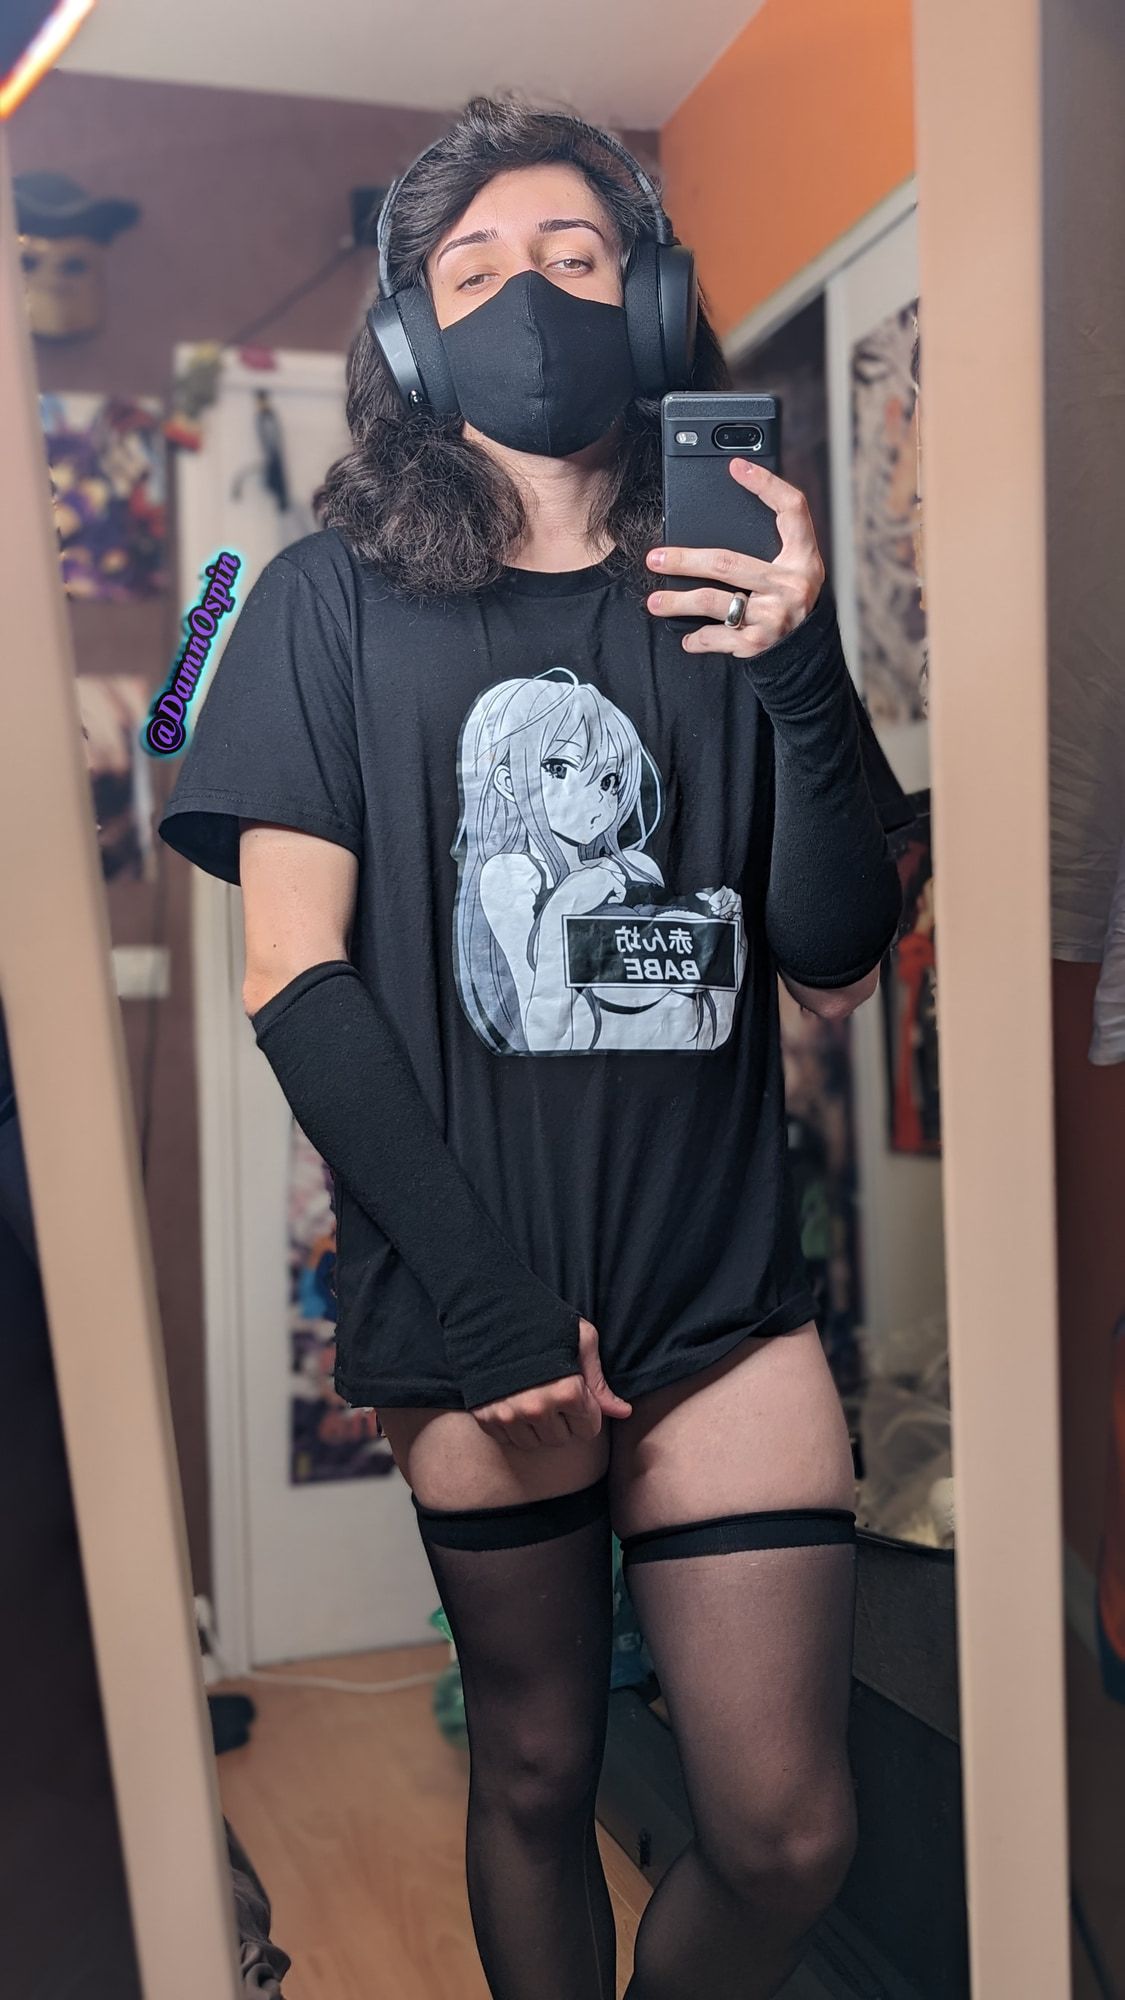 Femboy gamer outfit